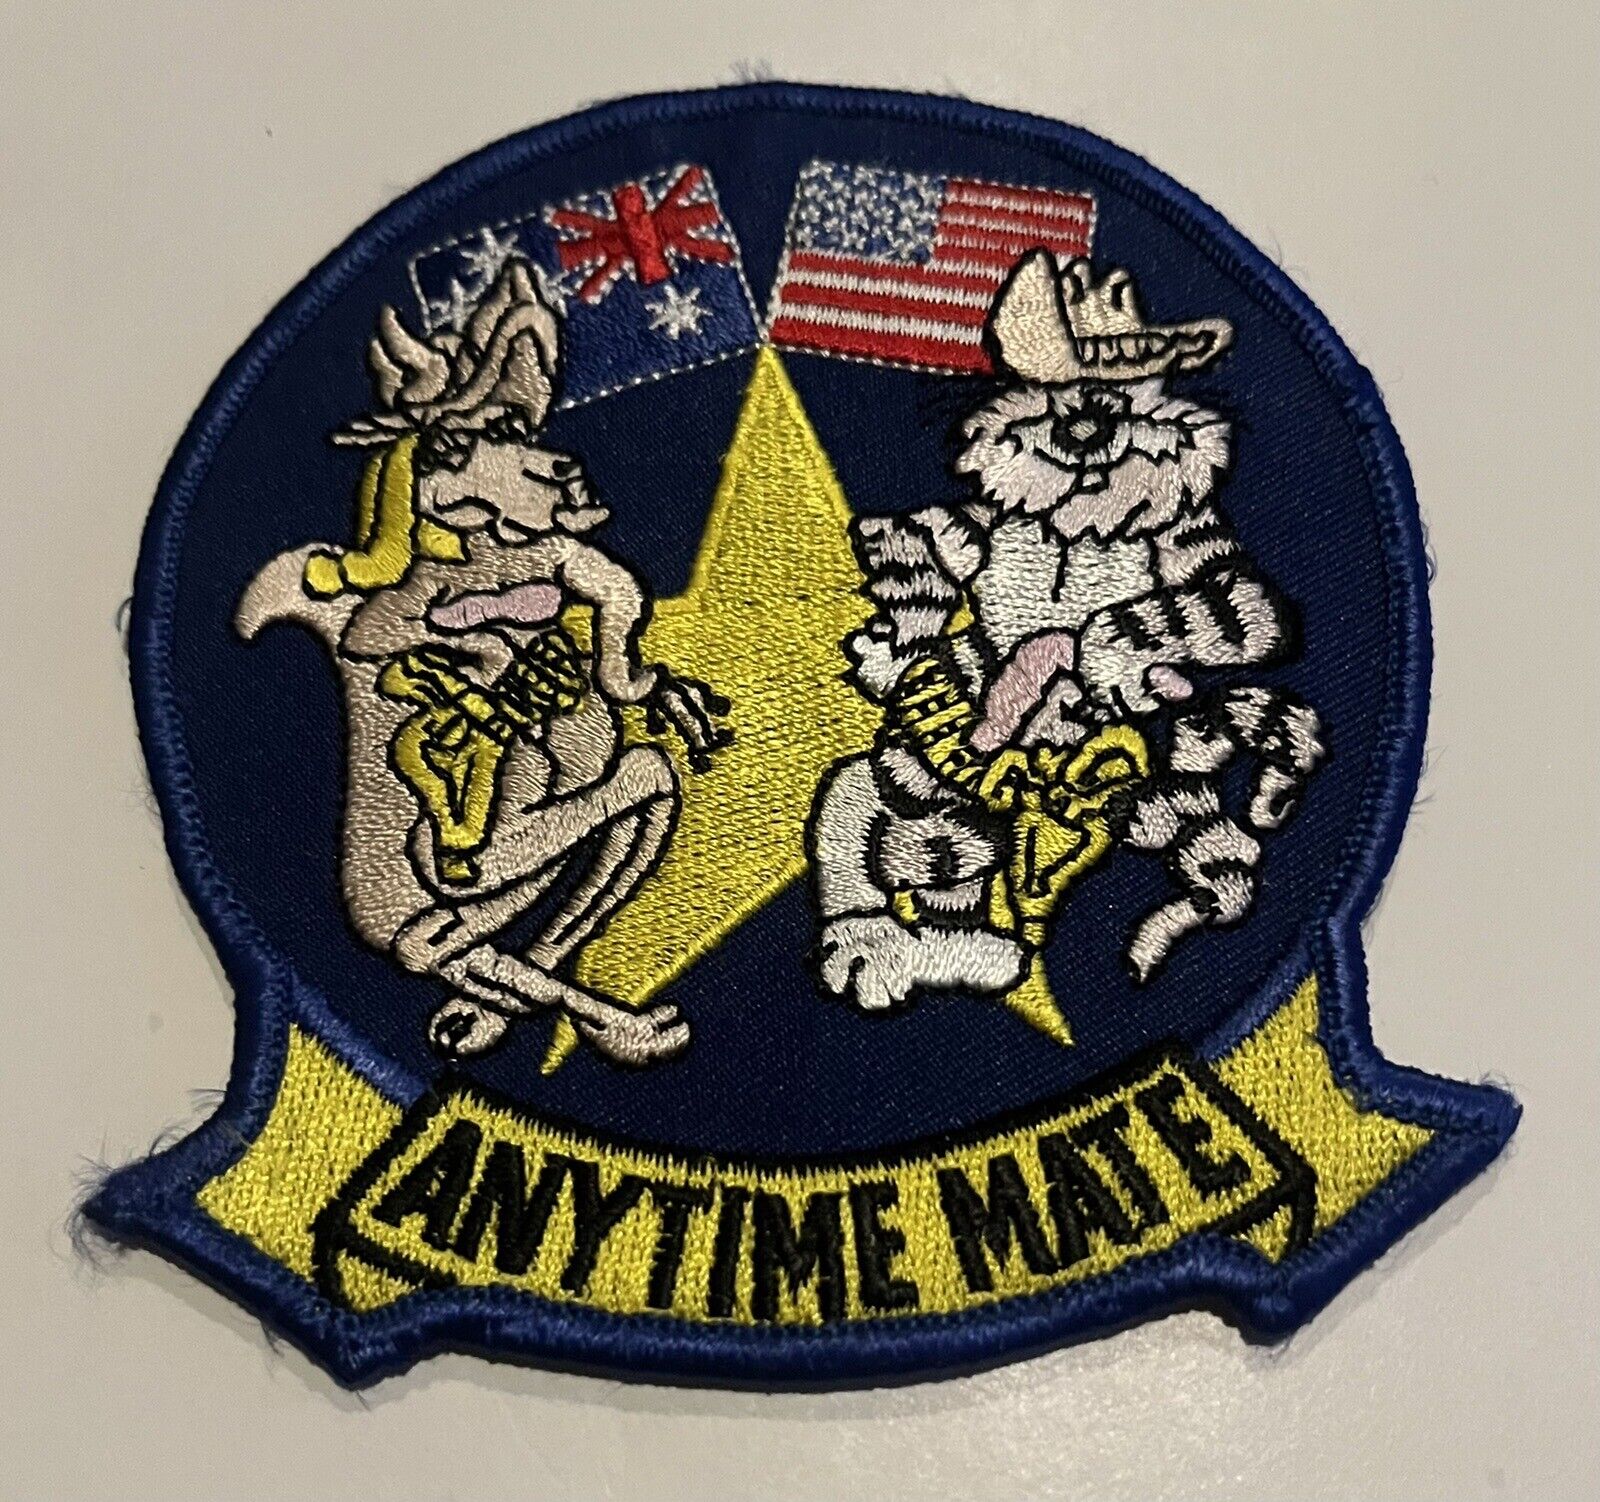 USN VF-51 ANYTIME MATE TOMCAT patch F-14 TOMCAT FIGHTER SQN